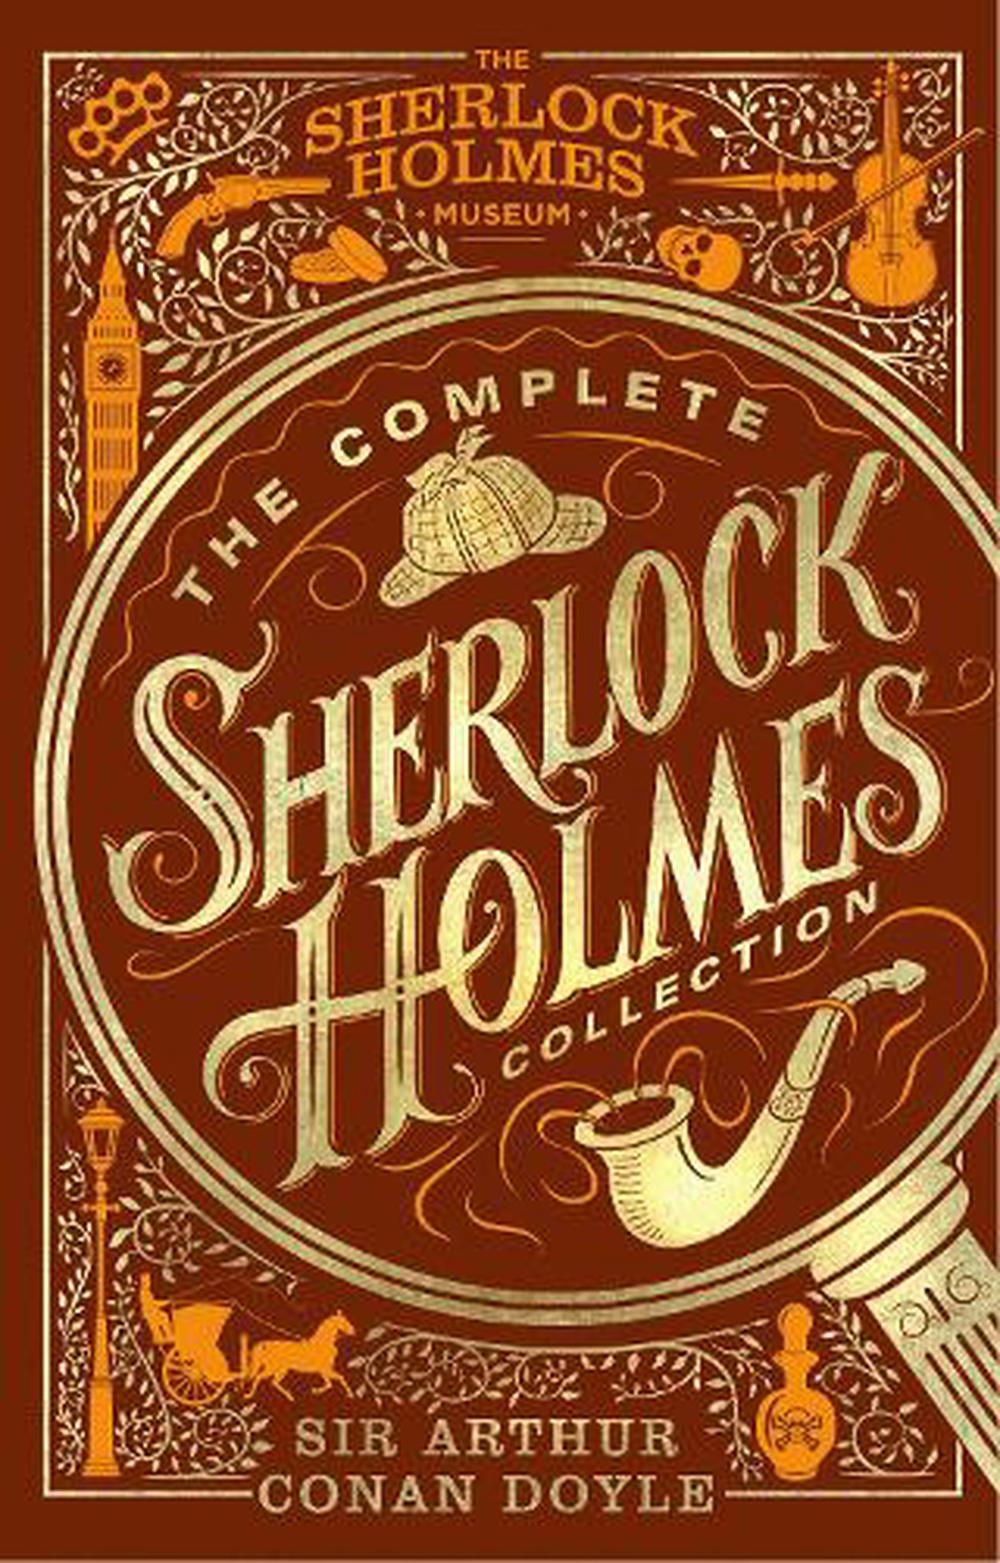 The Complete Sherlock Holmes Collection By Arthur Conan Doyle Hardcover Buy